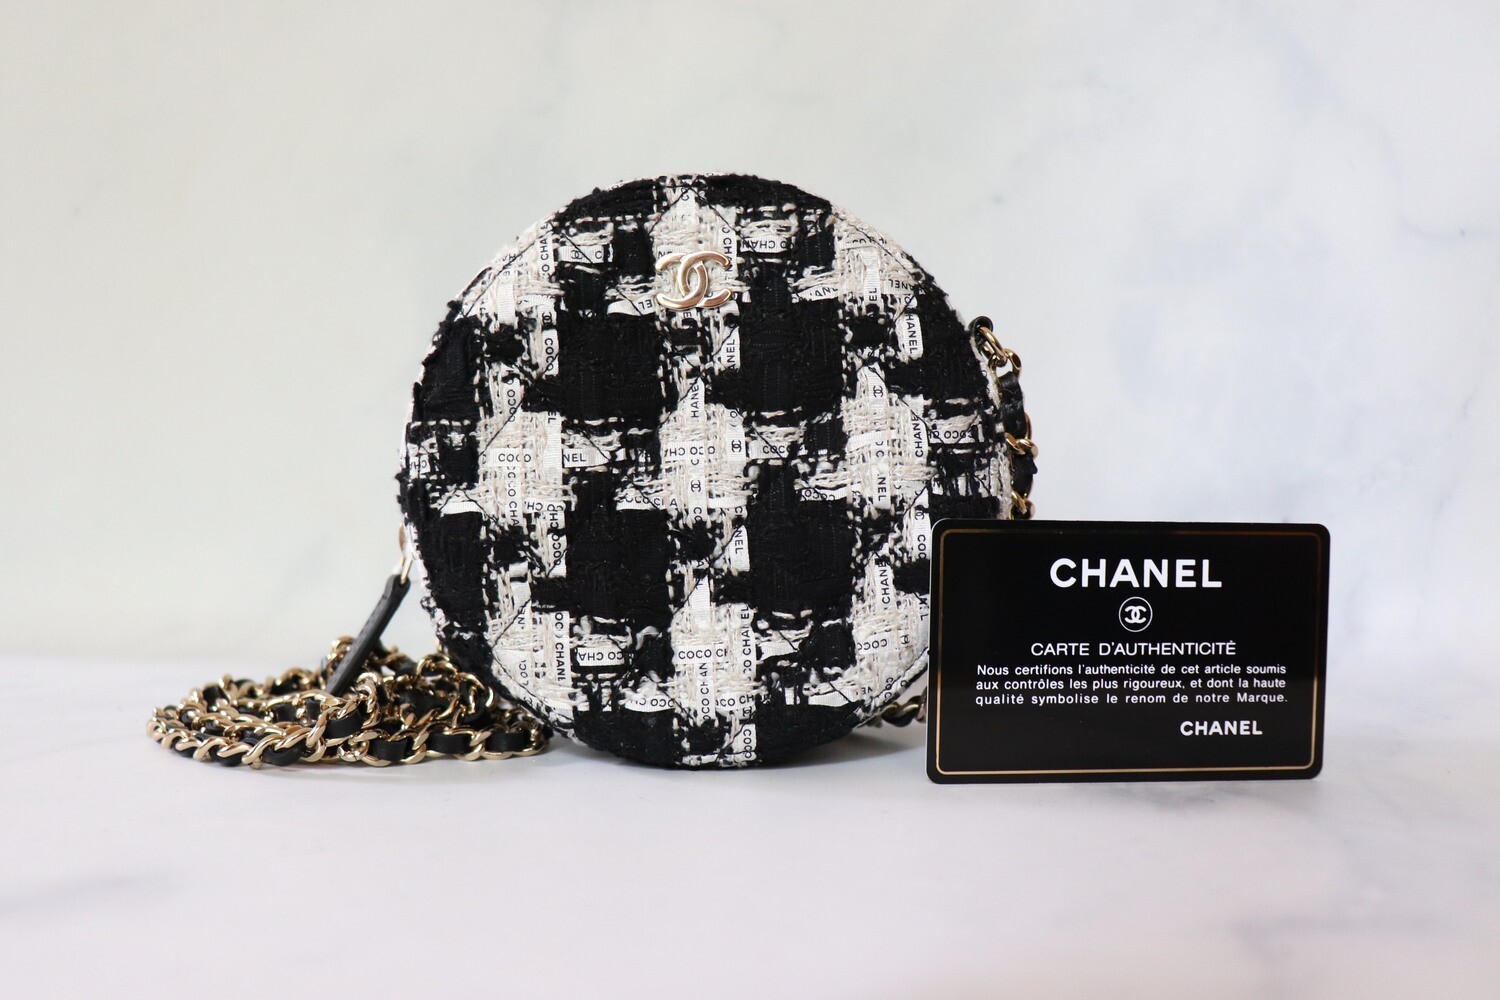 Chanel Round Tweed Ribbon Bag, New in Dustbag